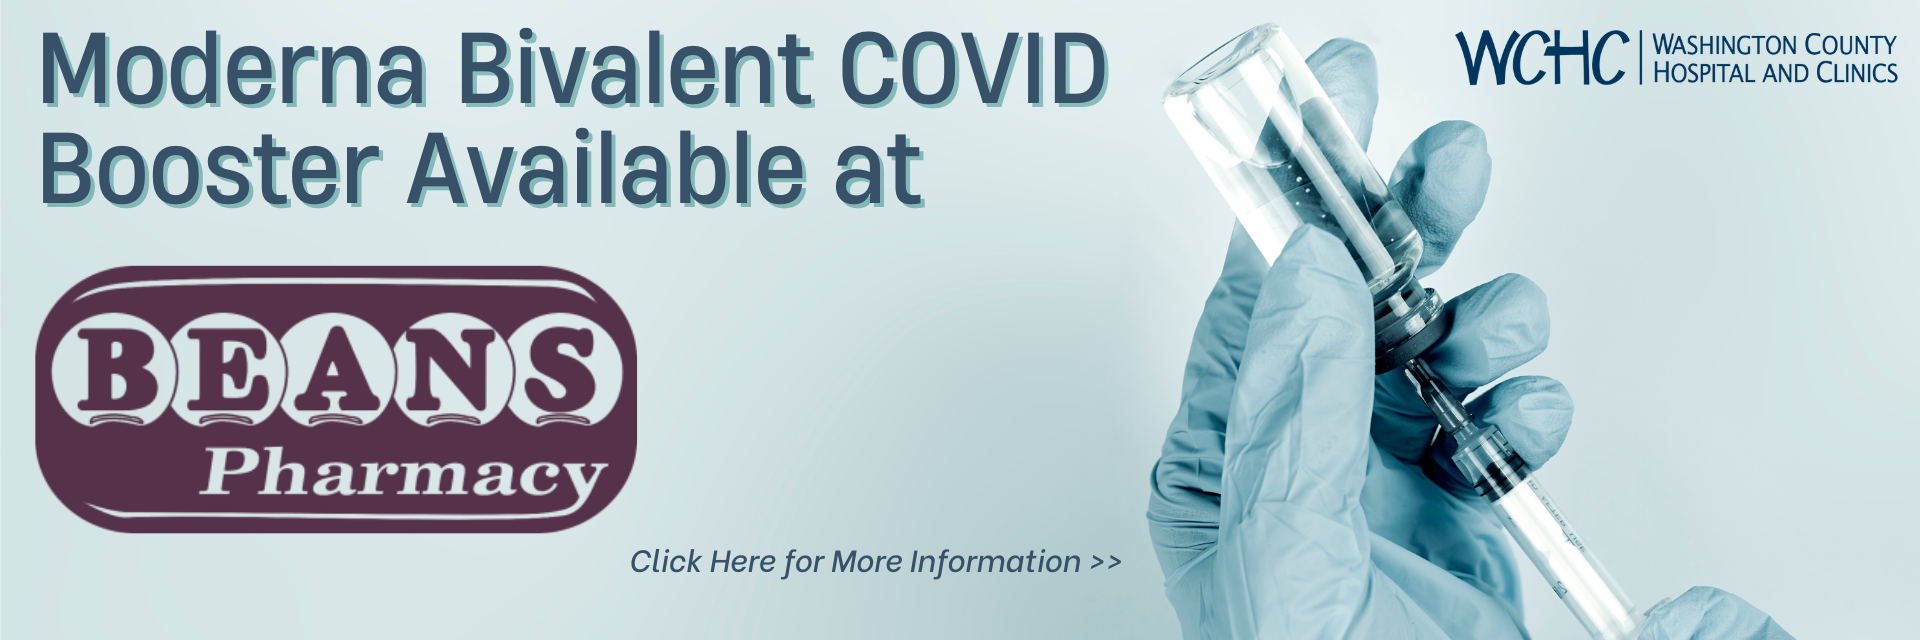 Moderna Bivalent COVID Booster Available at Beans Pharmacy
WCHC - WASHINGTON COUNTY HOSPITAL AND CLINICS